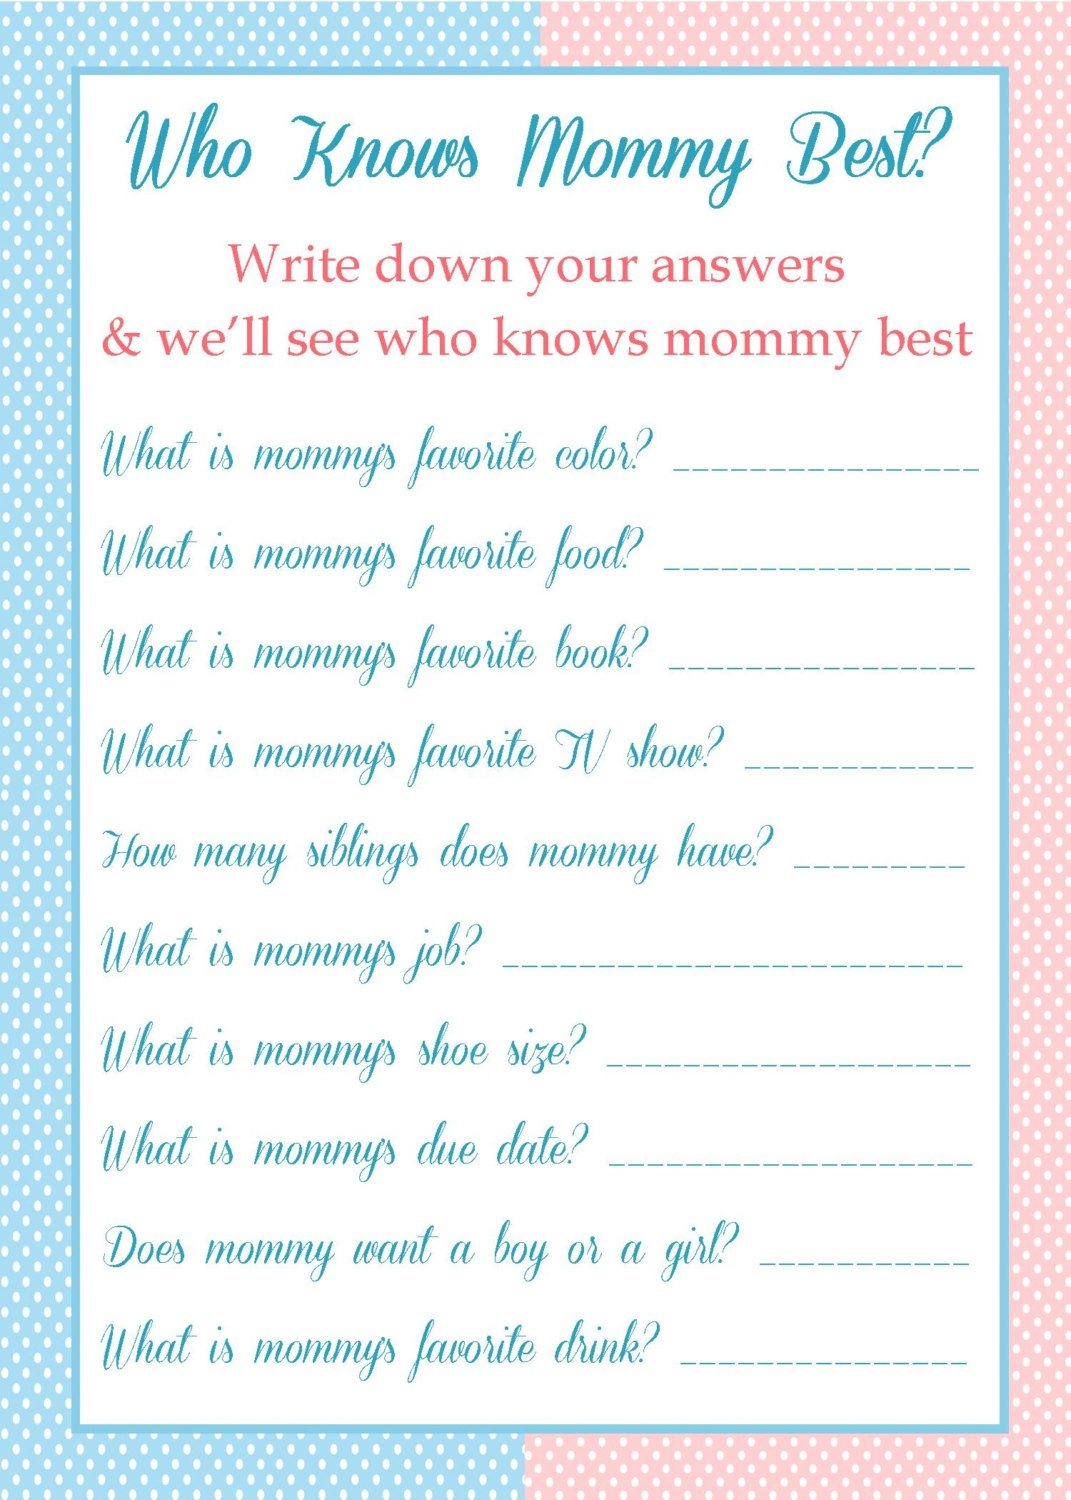 Who Knows Mommy Best - Baby Shower Game - $5.00 - Free Printable Baby Shower Games Who Knows Mommy The Best